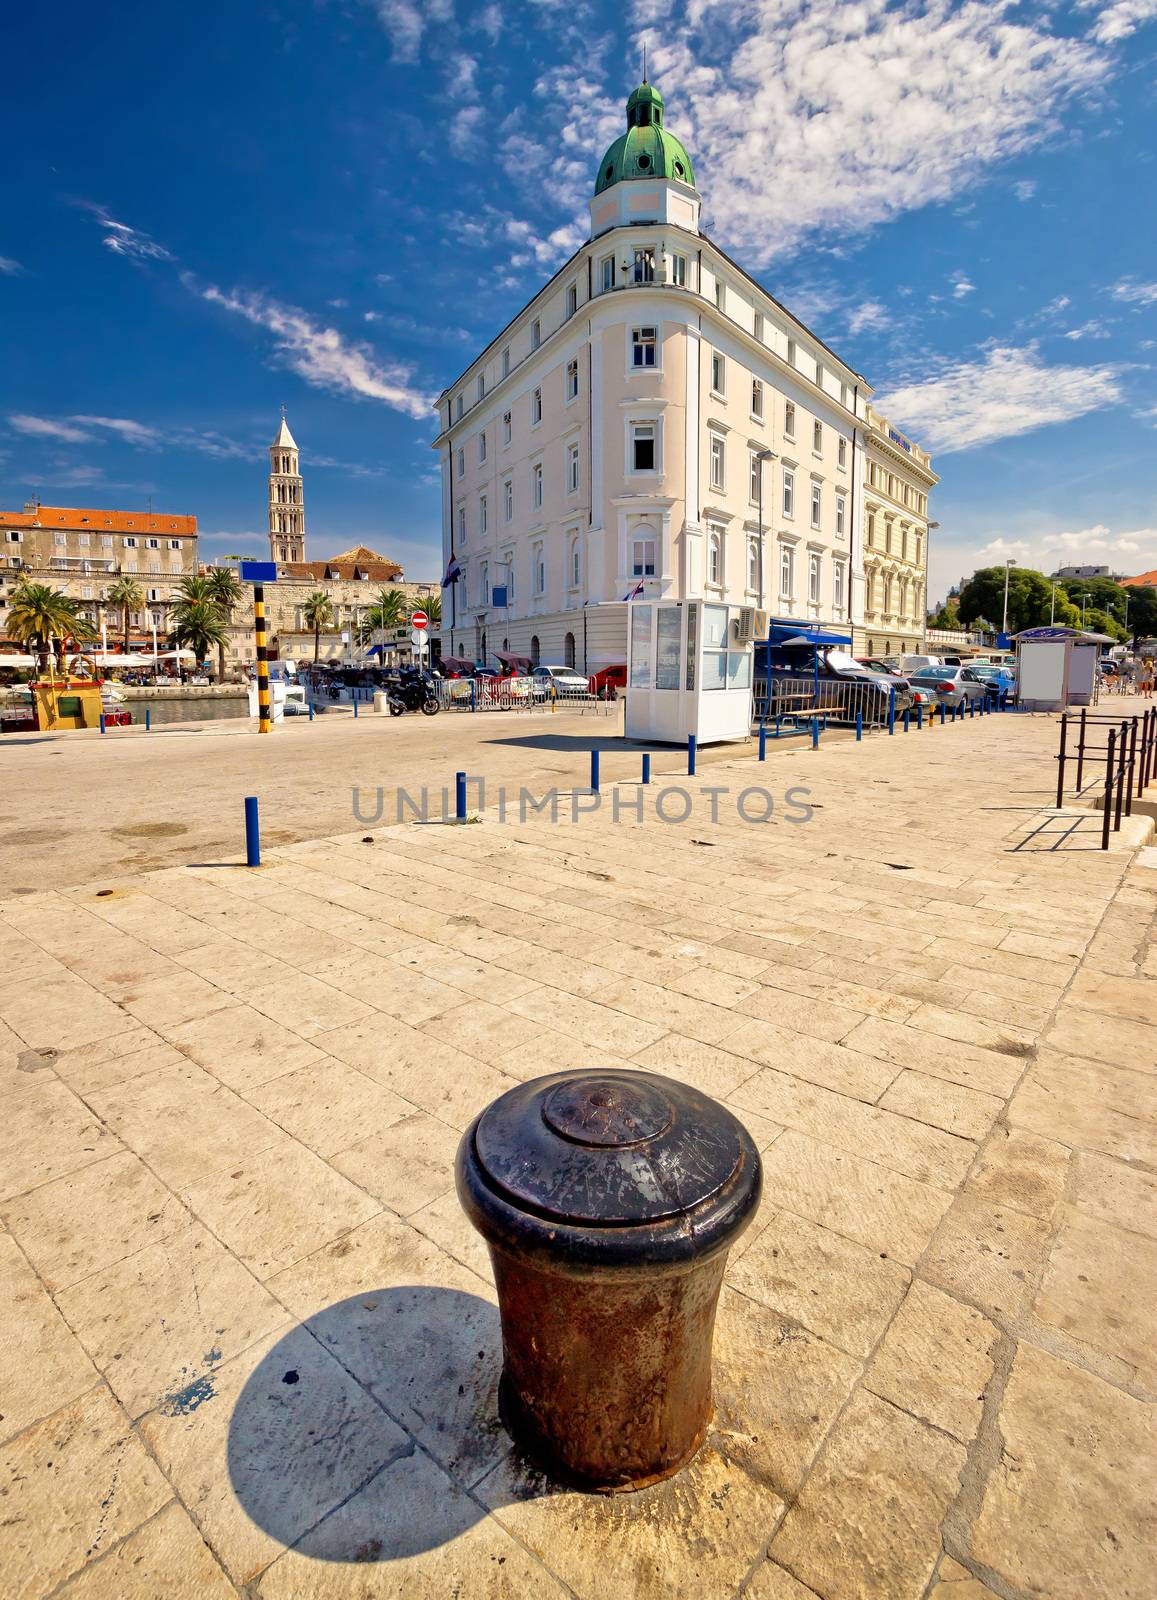 City of Split waterfront ancient architecture by xbrchx